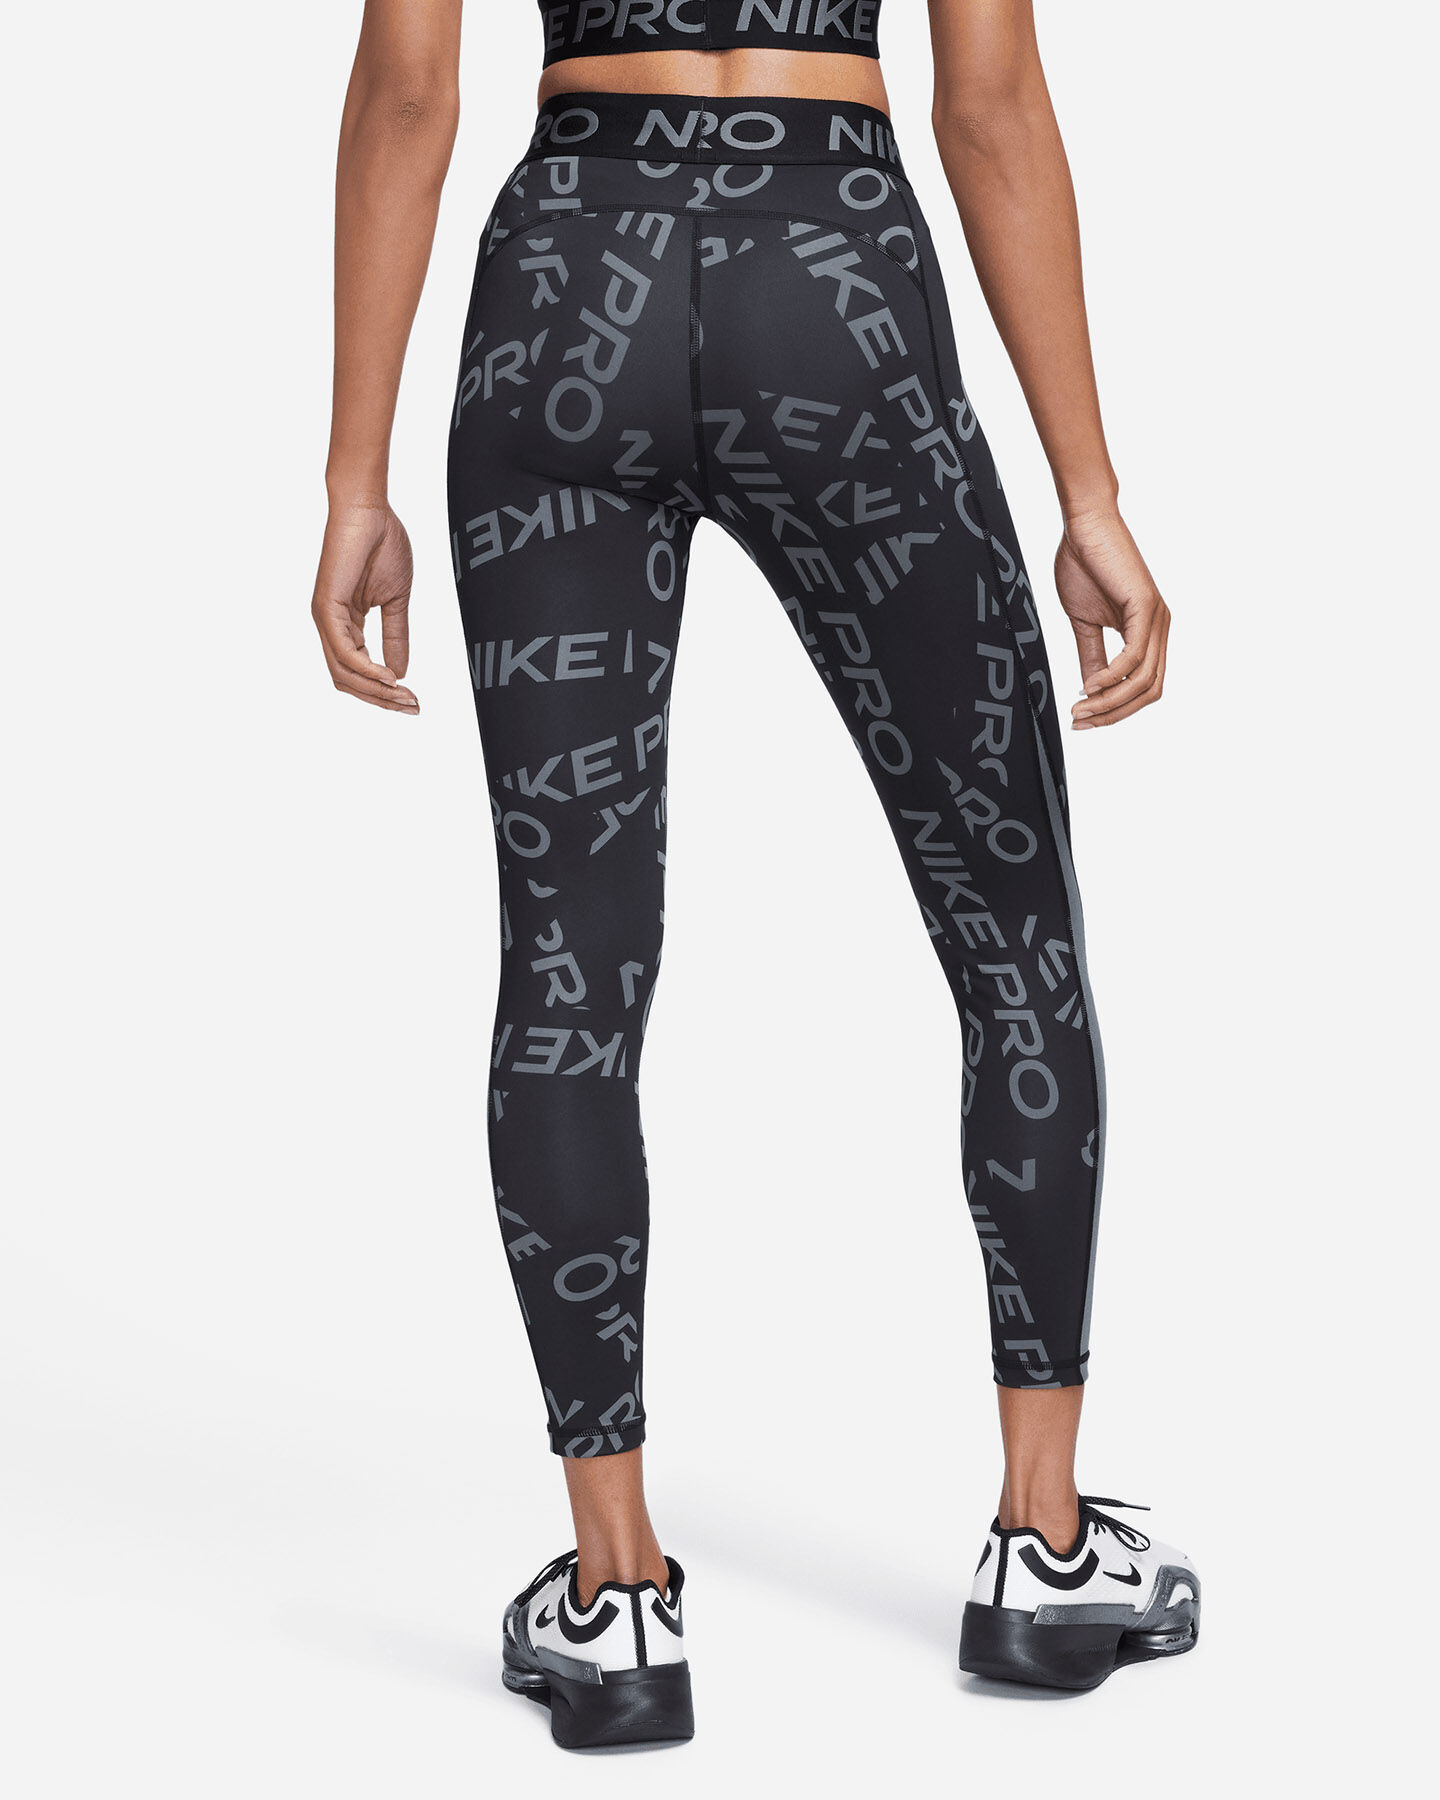  Leggings NIKE ALL OVER PRINTED W S5587903|010|M scatto 1